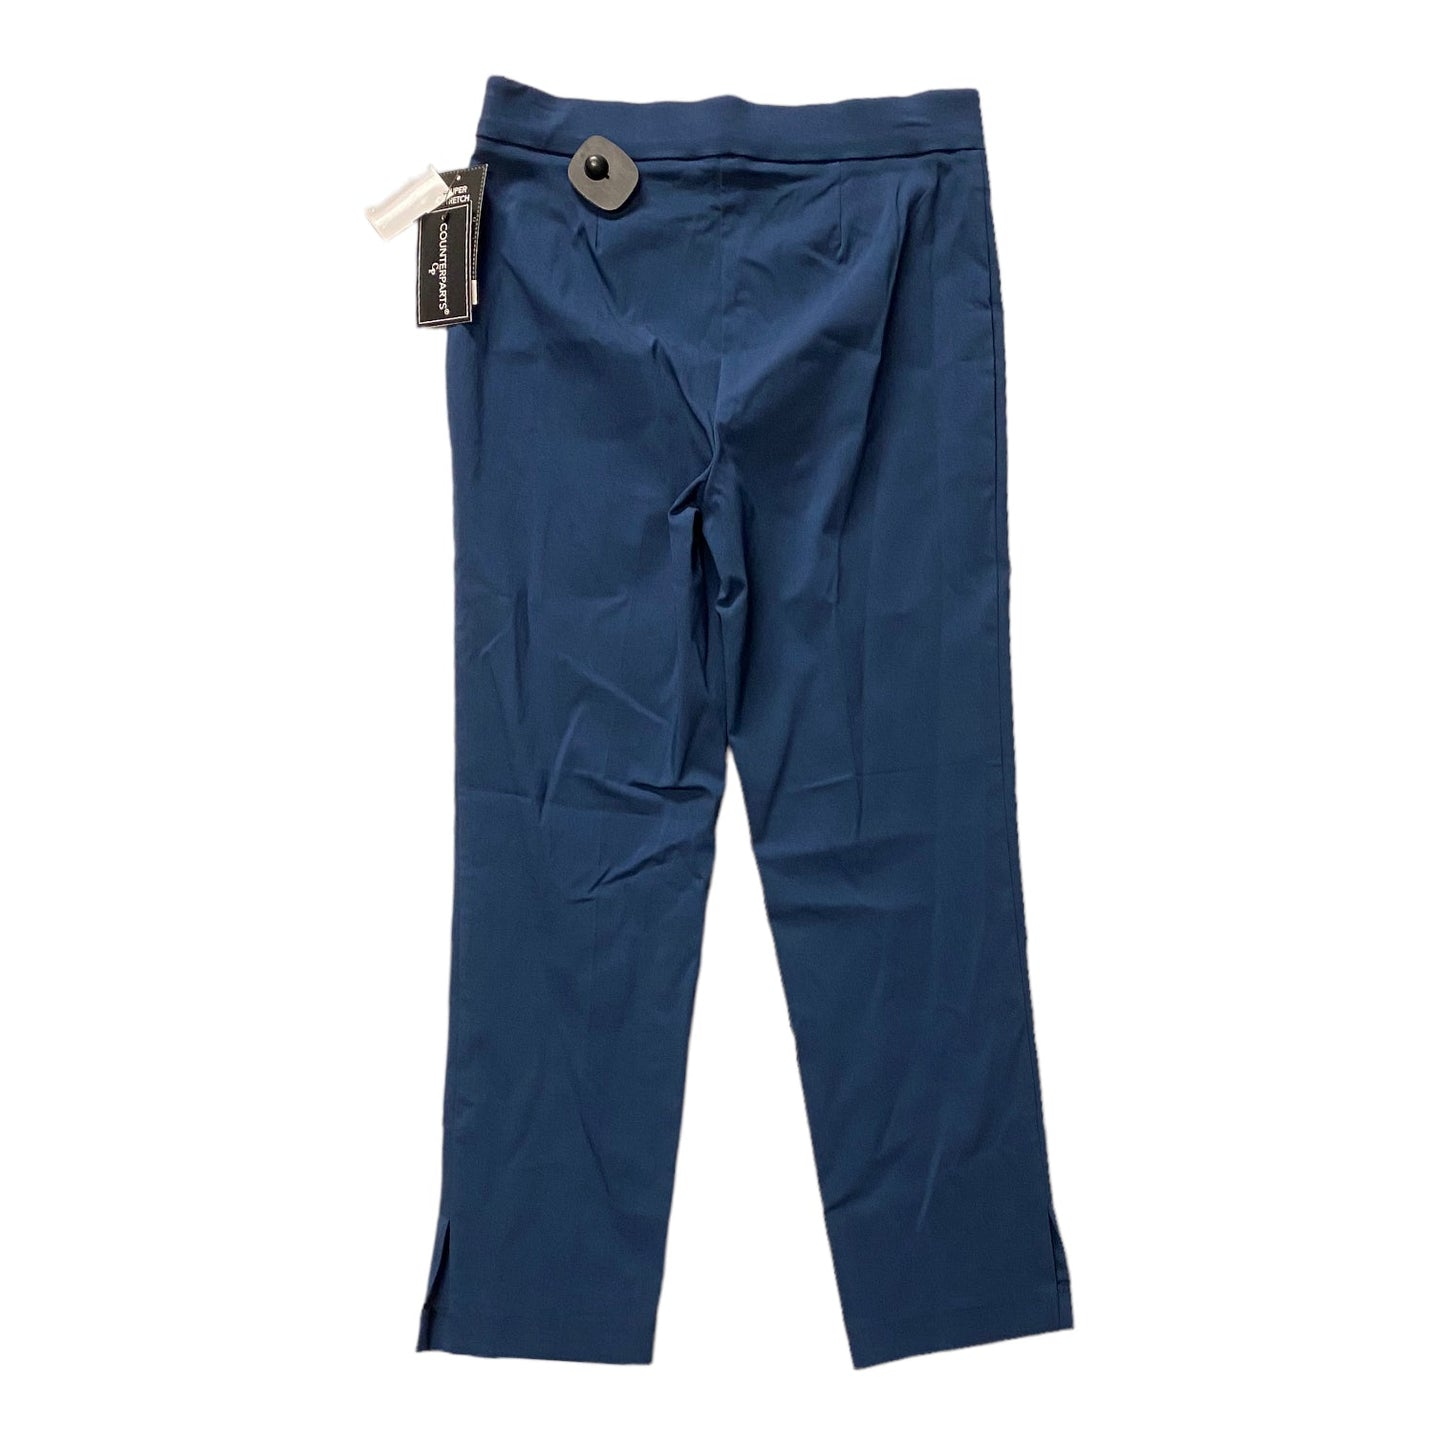 Navy Pants Other Counterparts, Size S